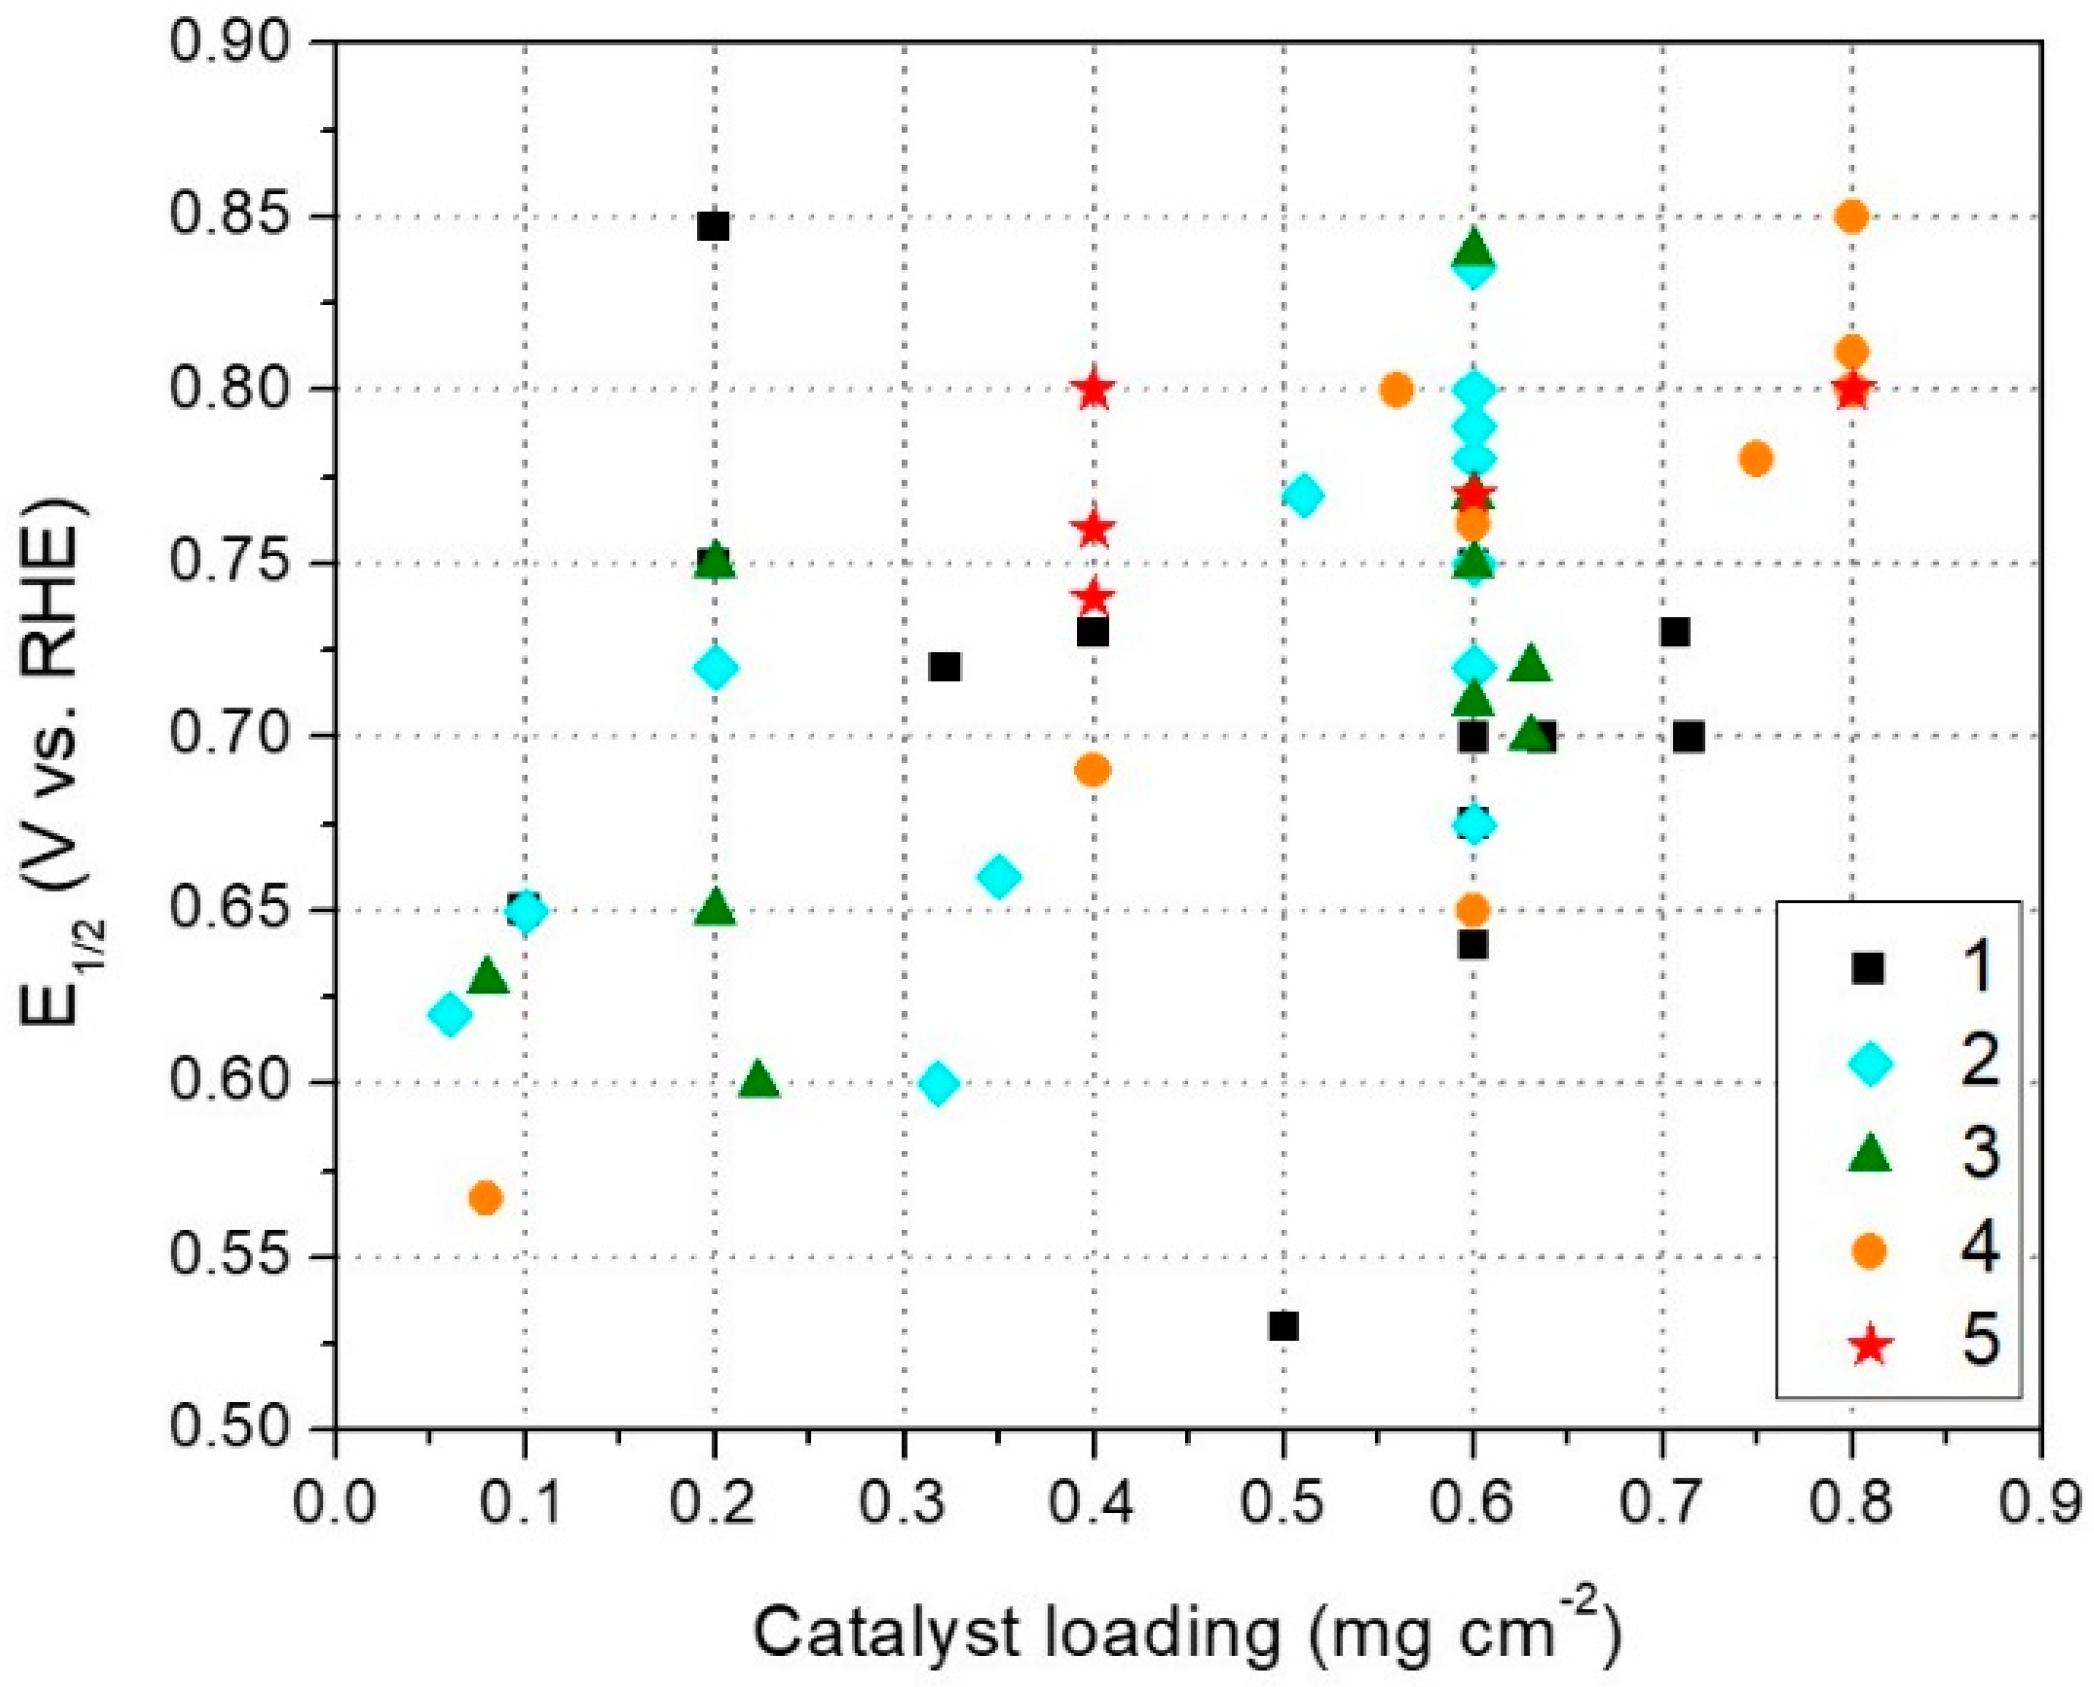 Chemengineering Free Full Text Transition Metal Nitrogen Carbon M N C Catalysts For Oxygen Reduction Reaction Insights On Synthesis And Performance In Polymer Electrolyte Fuel Cells Html